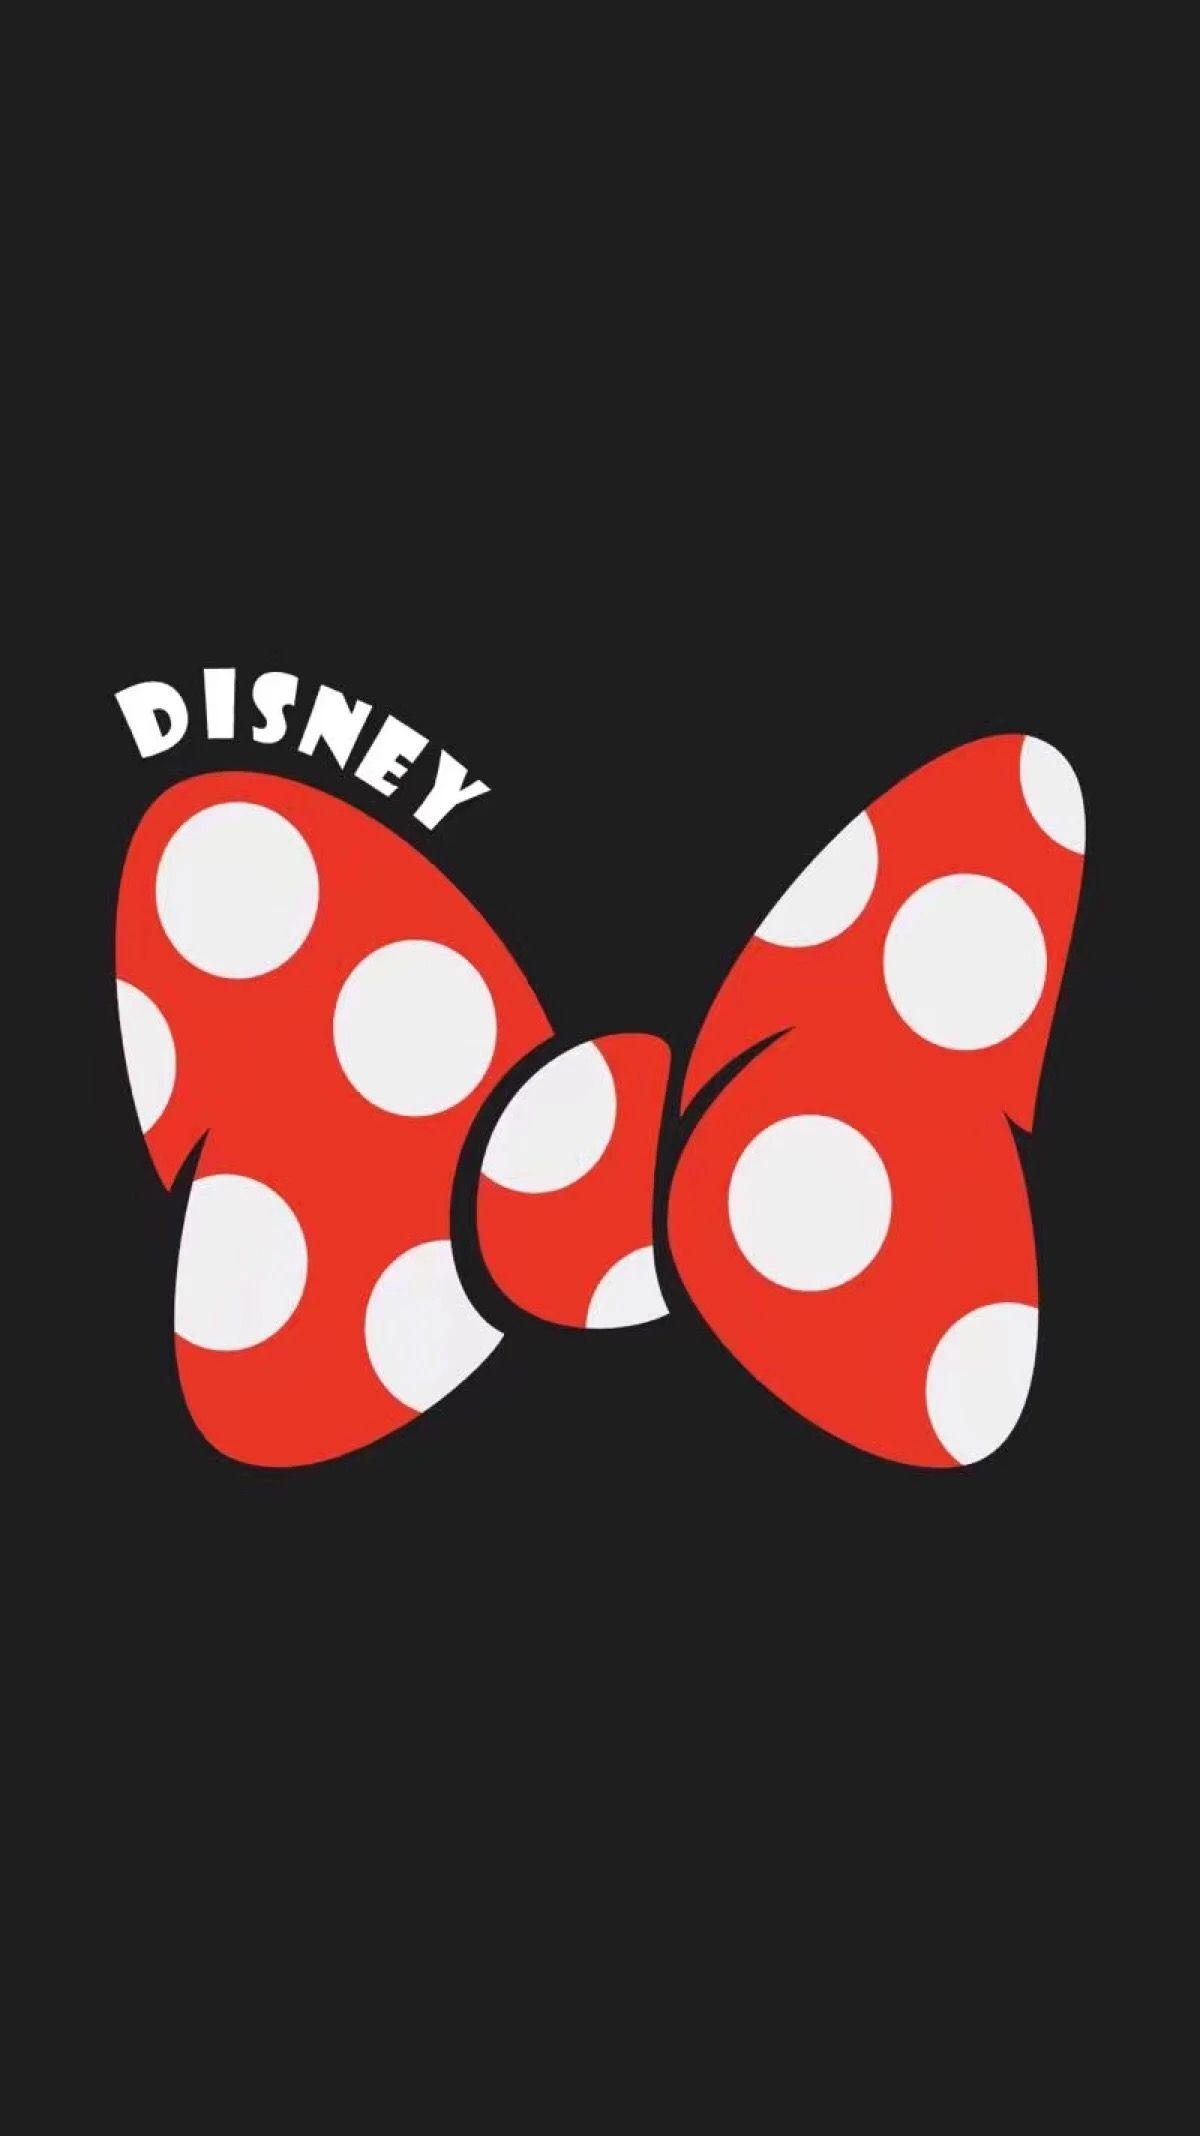 40 Minnie Mouse HD Wallpapers and Backgrounds